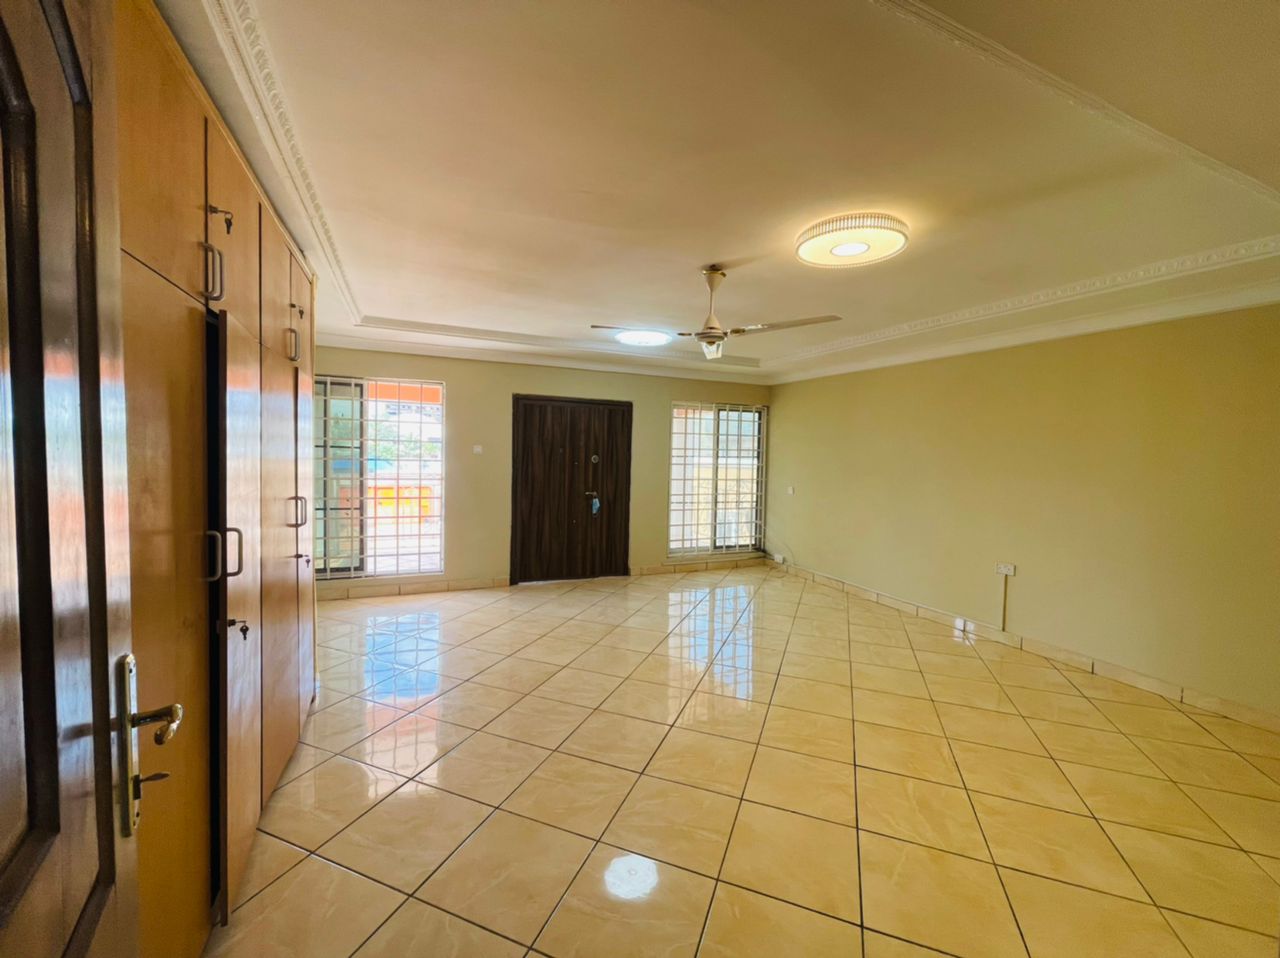 Six (6) Bedroom House for Rent At West Trasacco 